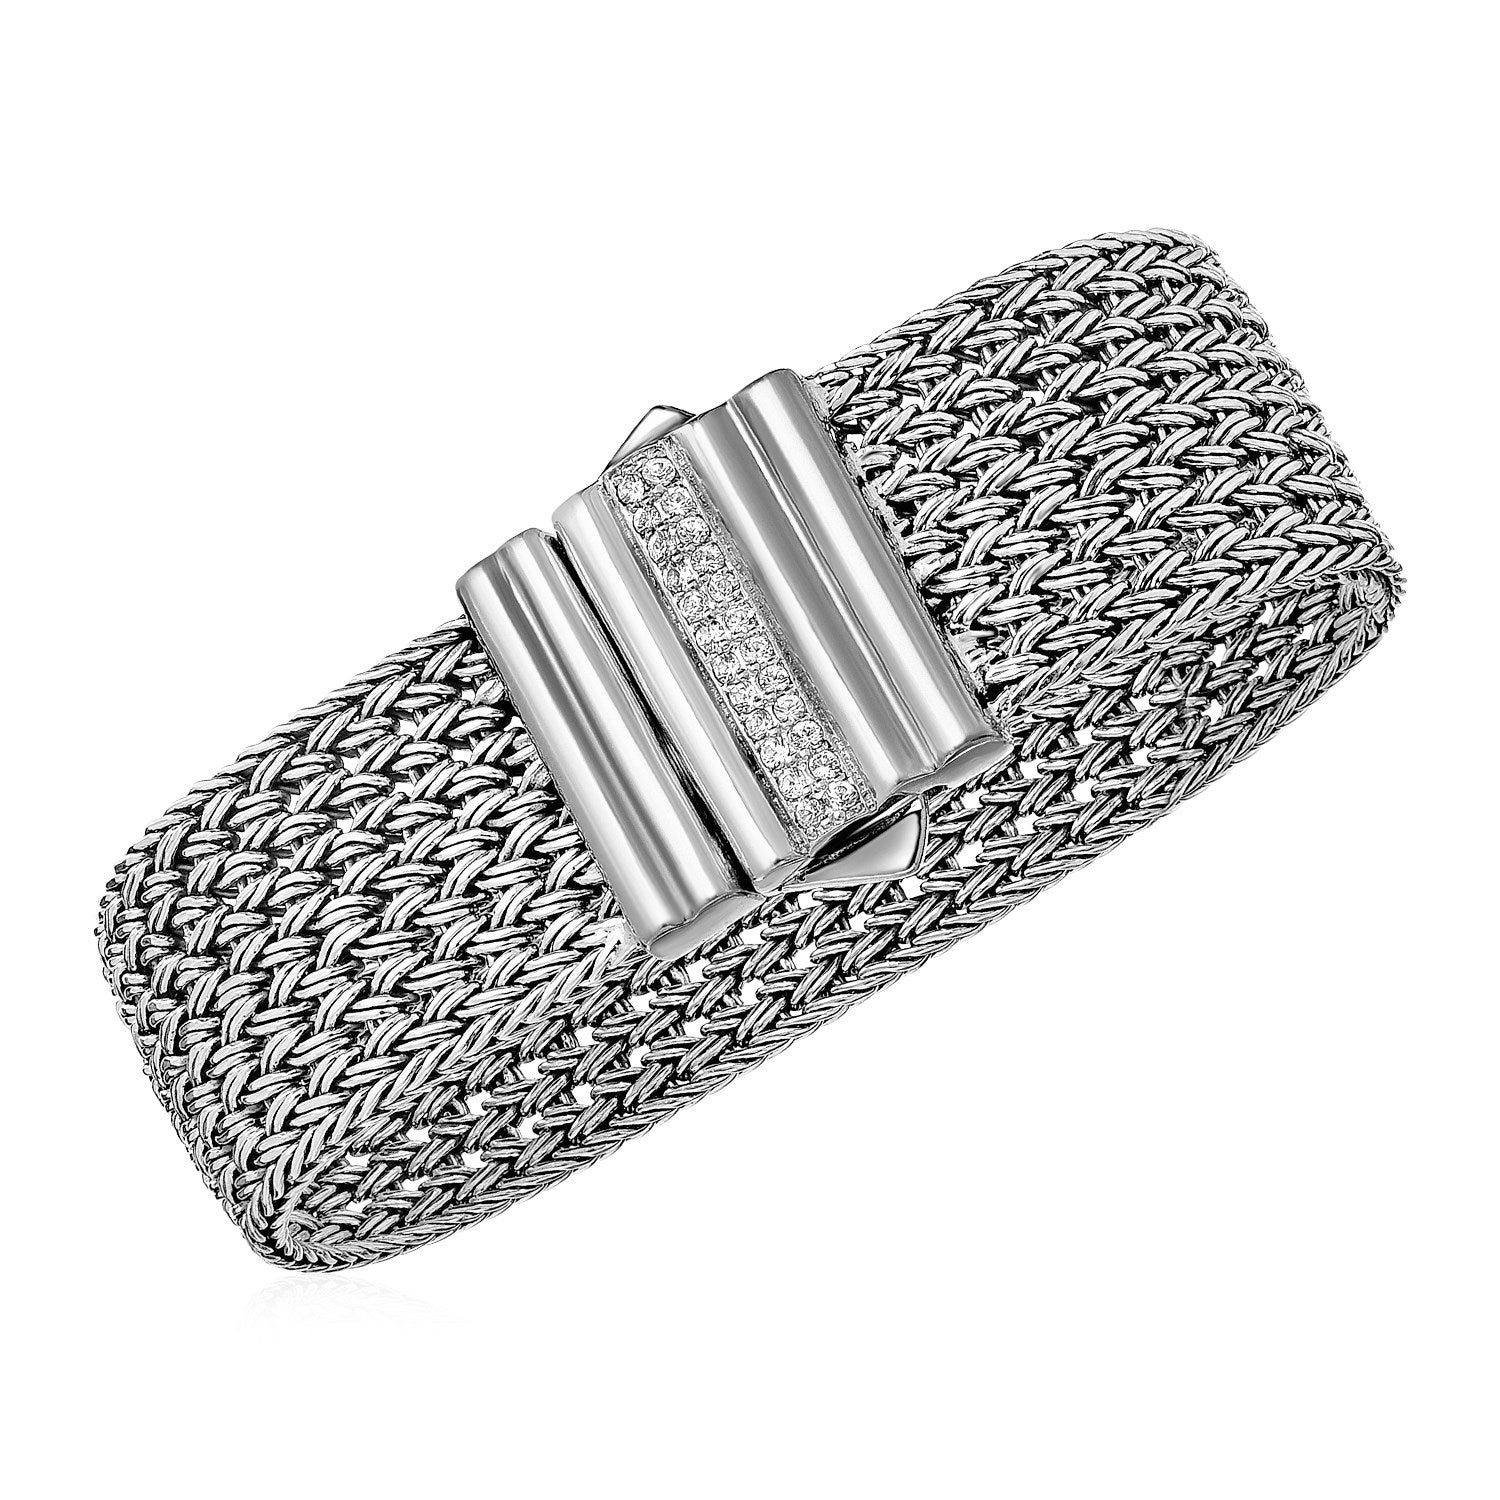 Wide Woven Rope Bracelet with White Sapphire Accented Clasp in Sterling Silver